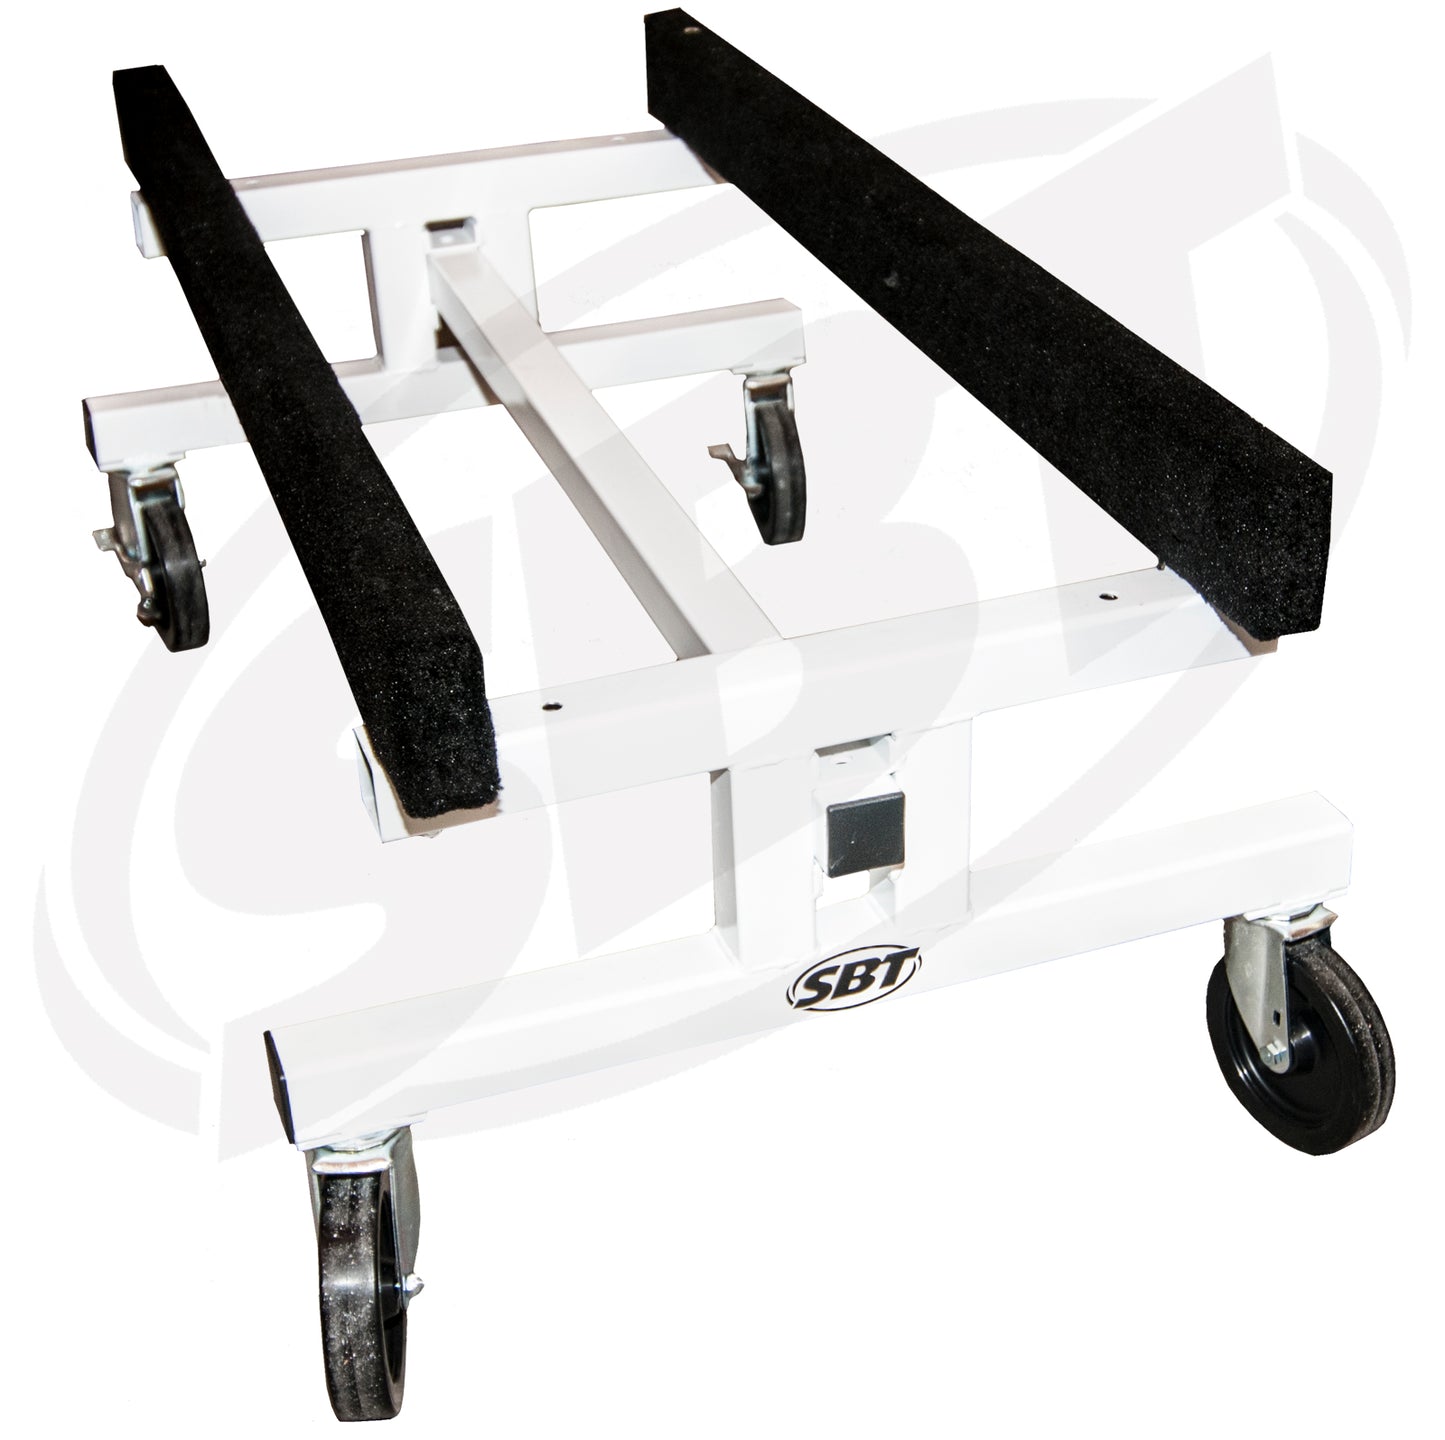 SBT PWC Shop Cart - Trailer Height (20") - 20" or 14" Adjustable Bunk Centers with 6" Wheels